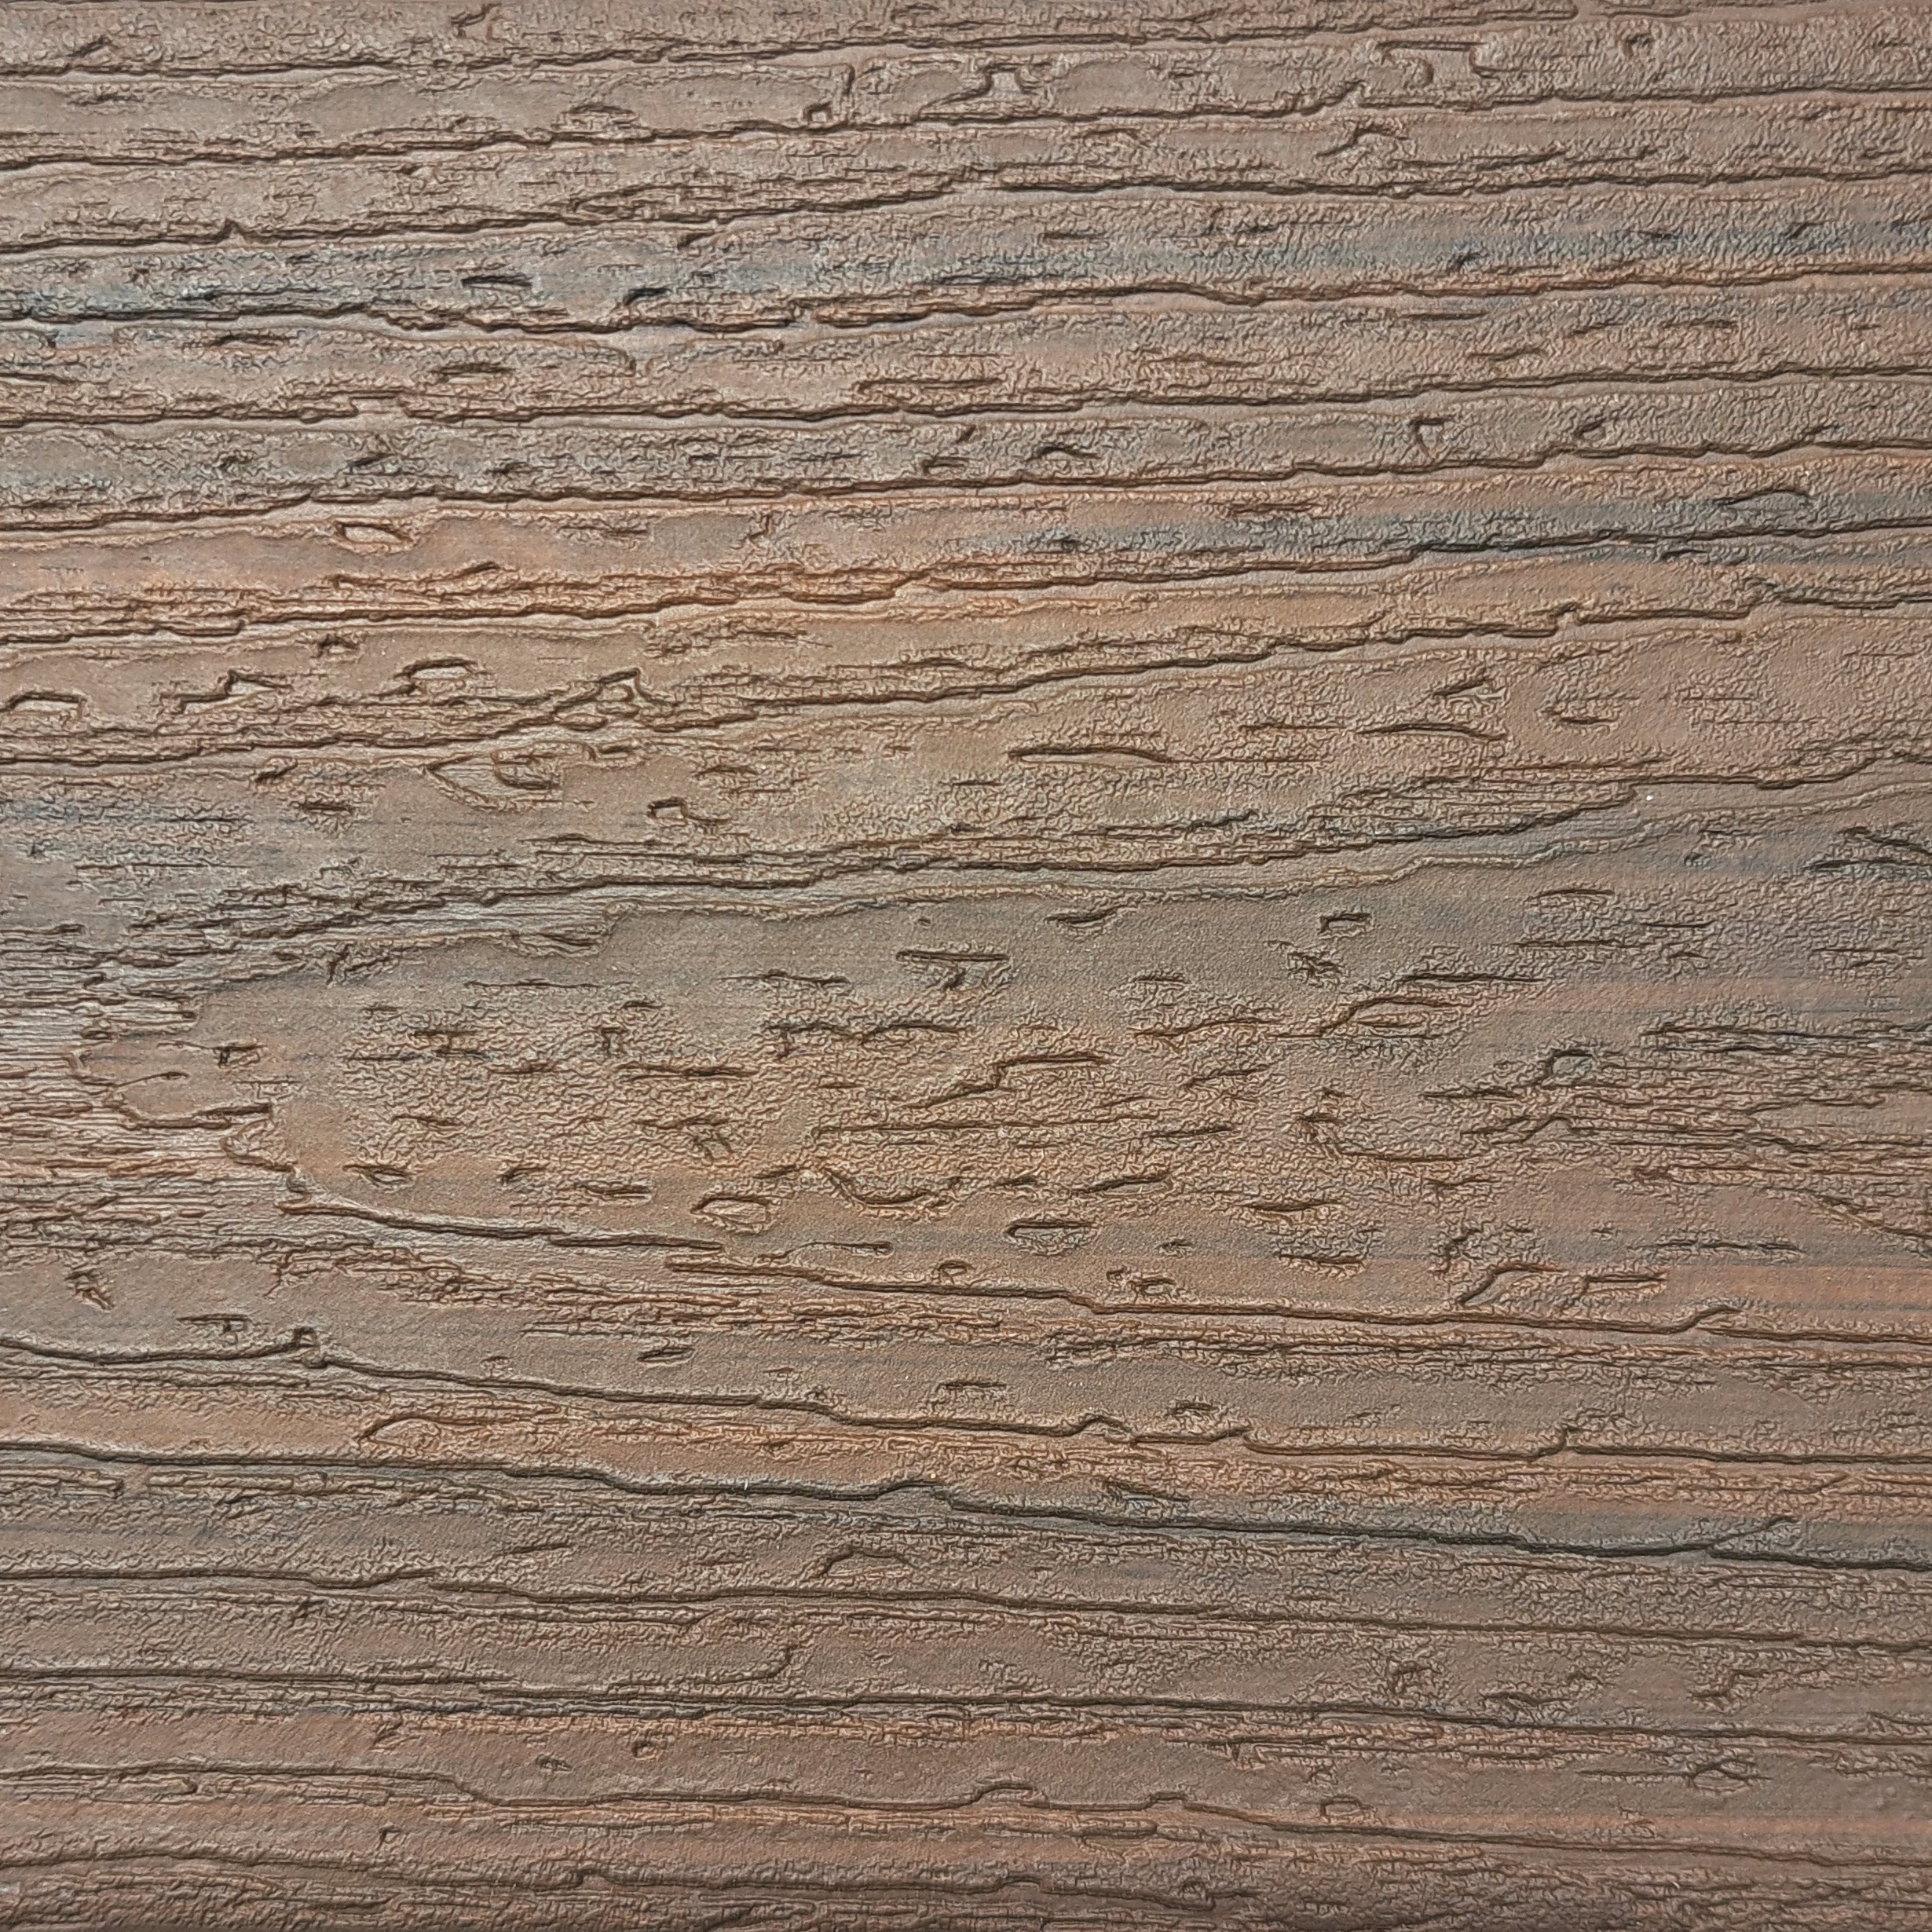 Texture of Trex Toasted Sand Decking